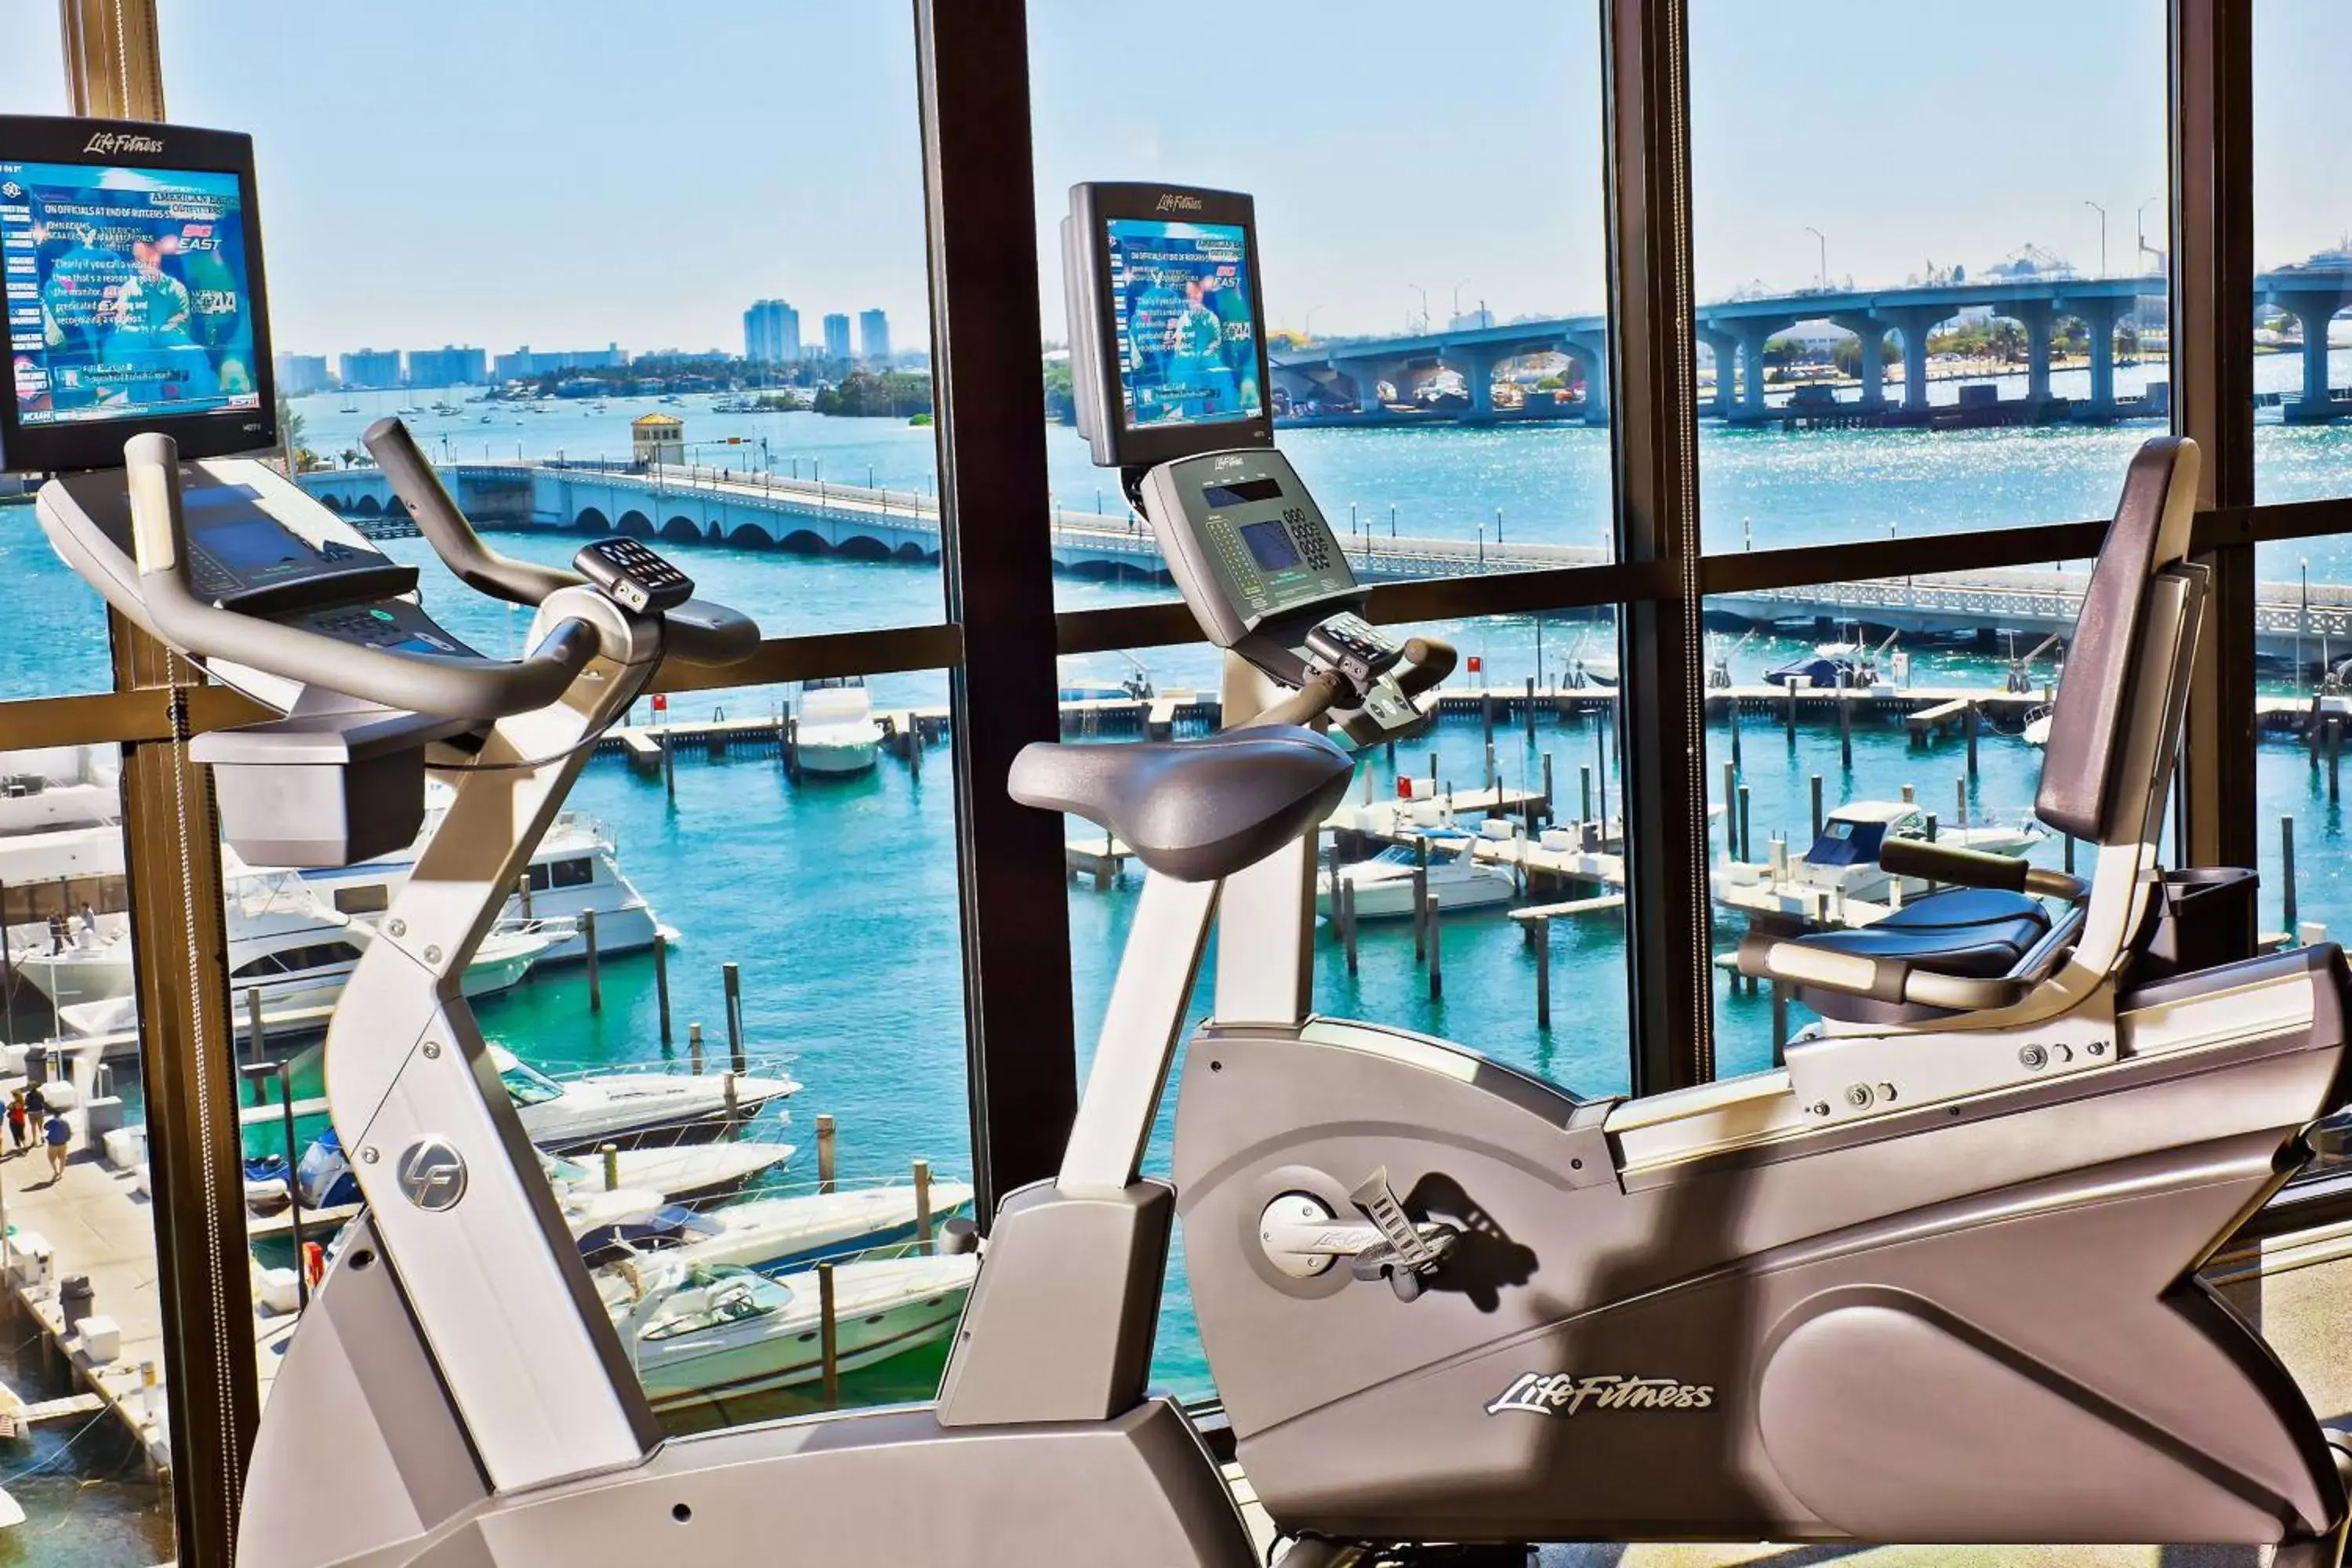 Fitness centre/facilities, Fitness Center/Facilities in Miami Marriott Biscayne Bay